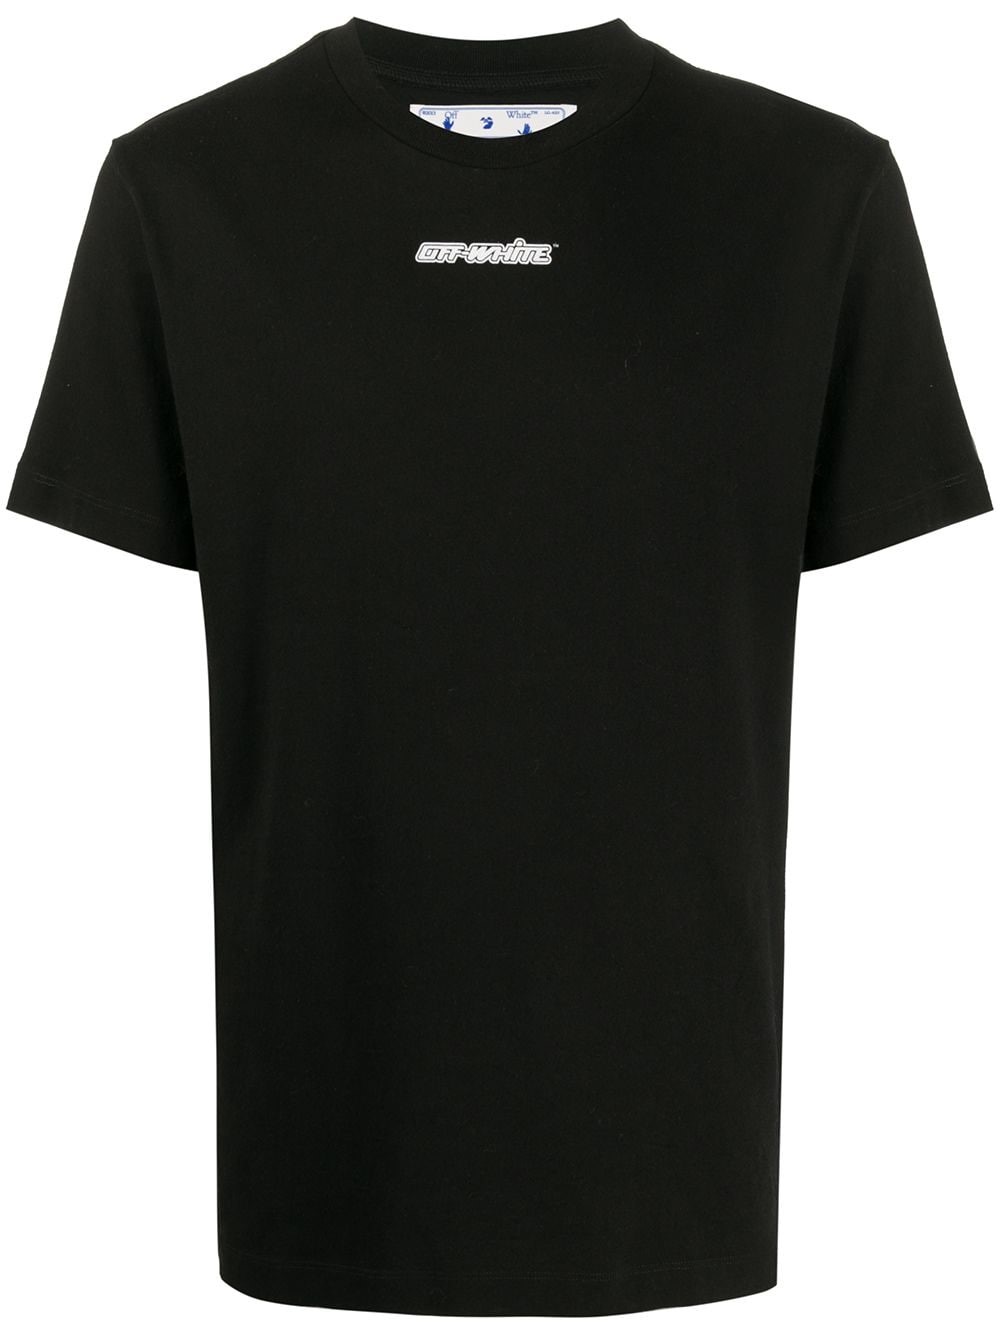 off-white MARKER T-SHIRT available on montiboutique.com - 34850